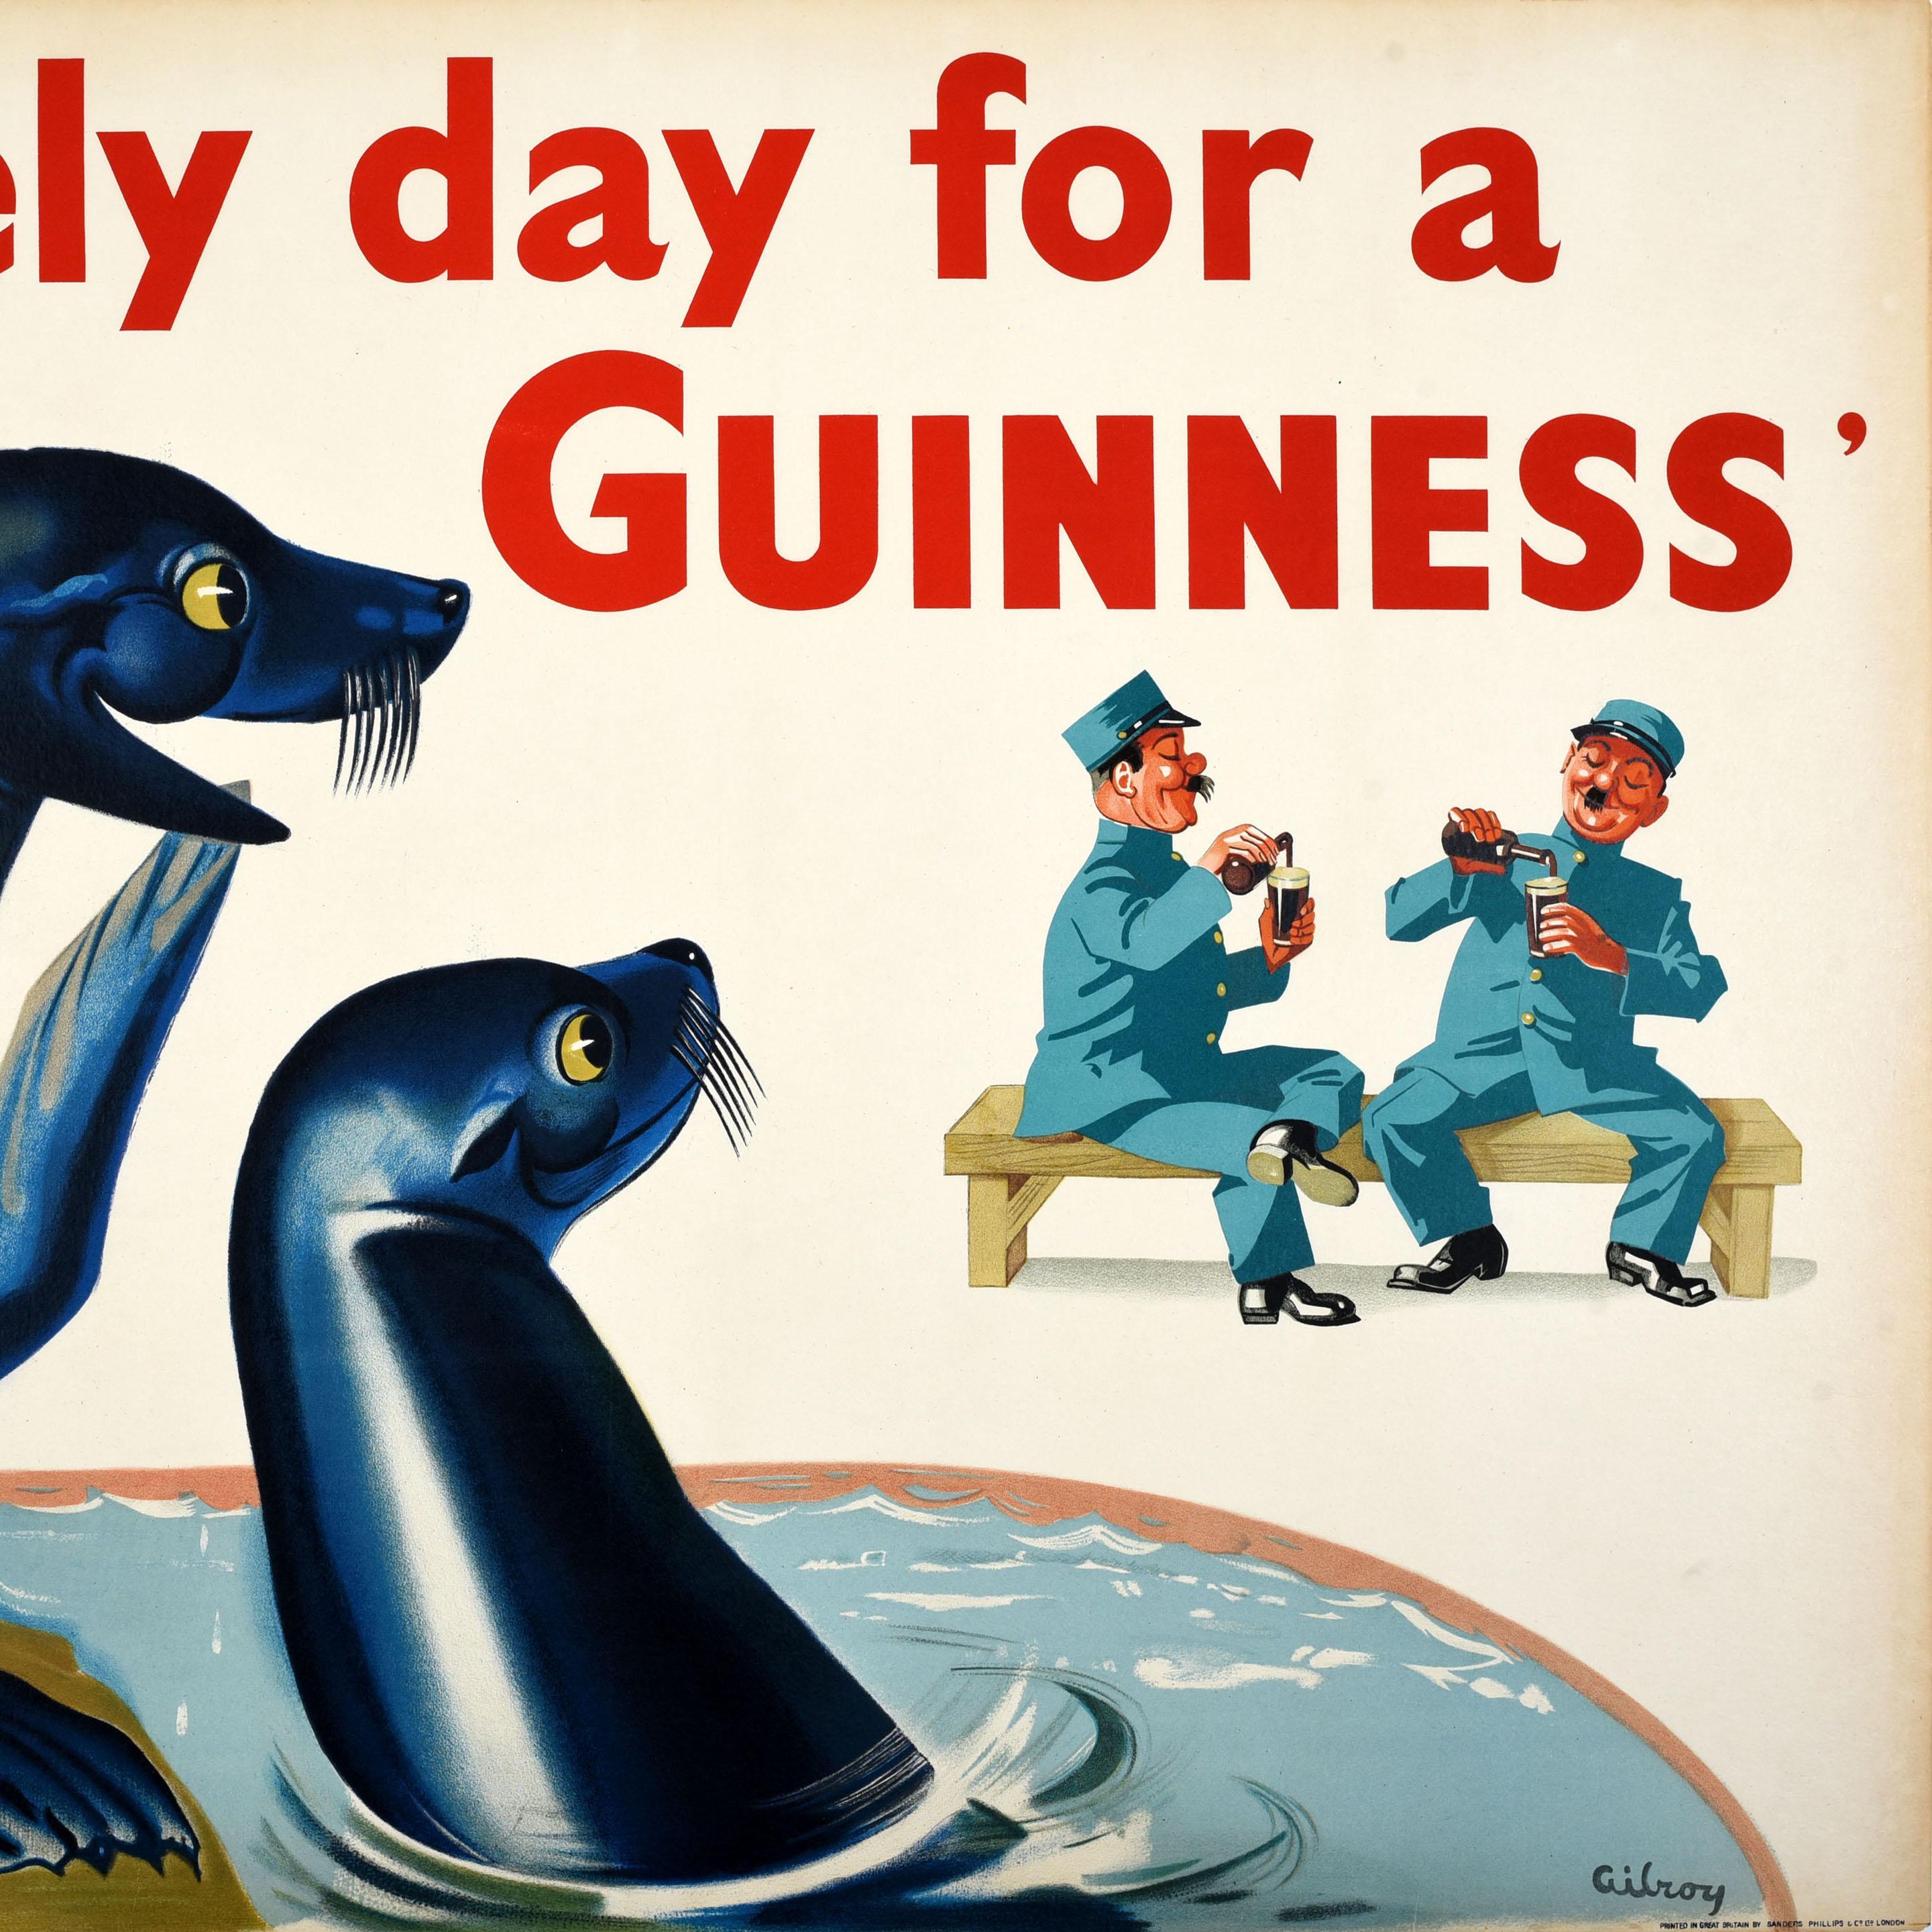 Original vintage advertising poster for the iconic drink Guinness Irish stout beer with the quote in red - Lovely Day For A Guinness - above a fun image of smiling seals looking at two zoo keepers sitting on a bench and pouring their bottles of